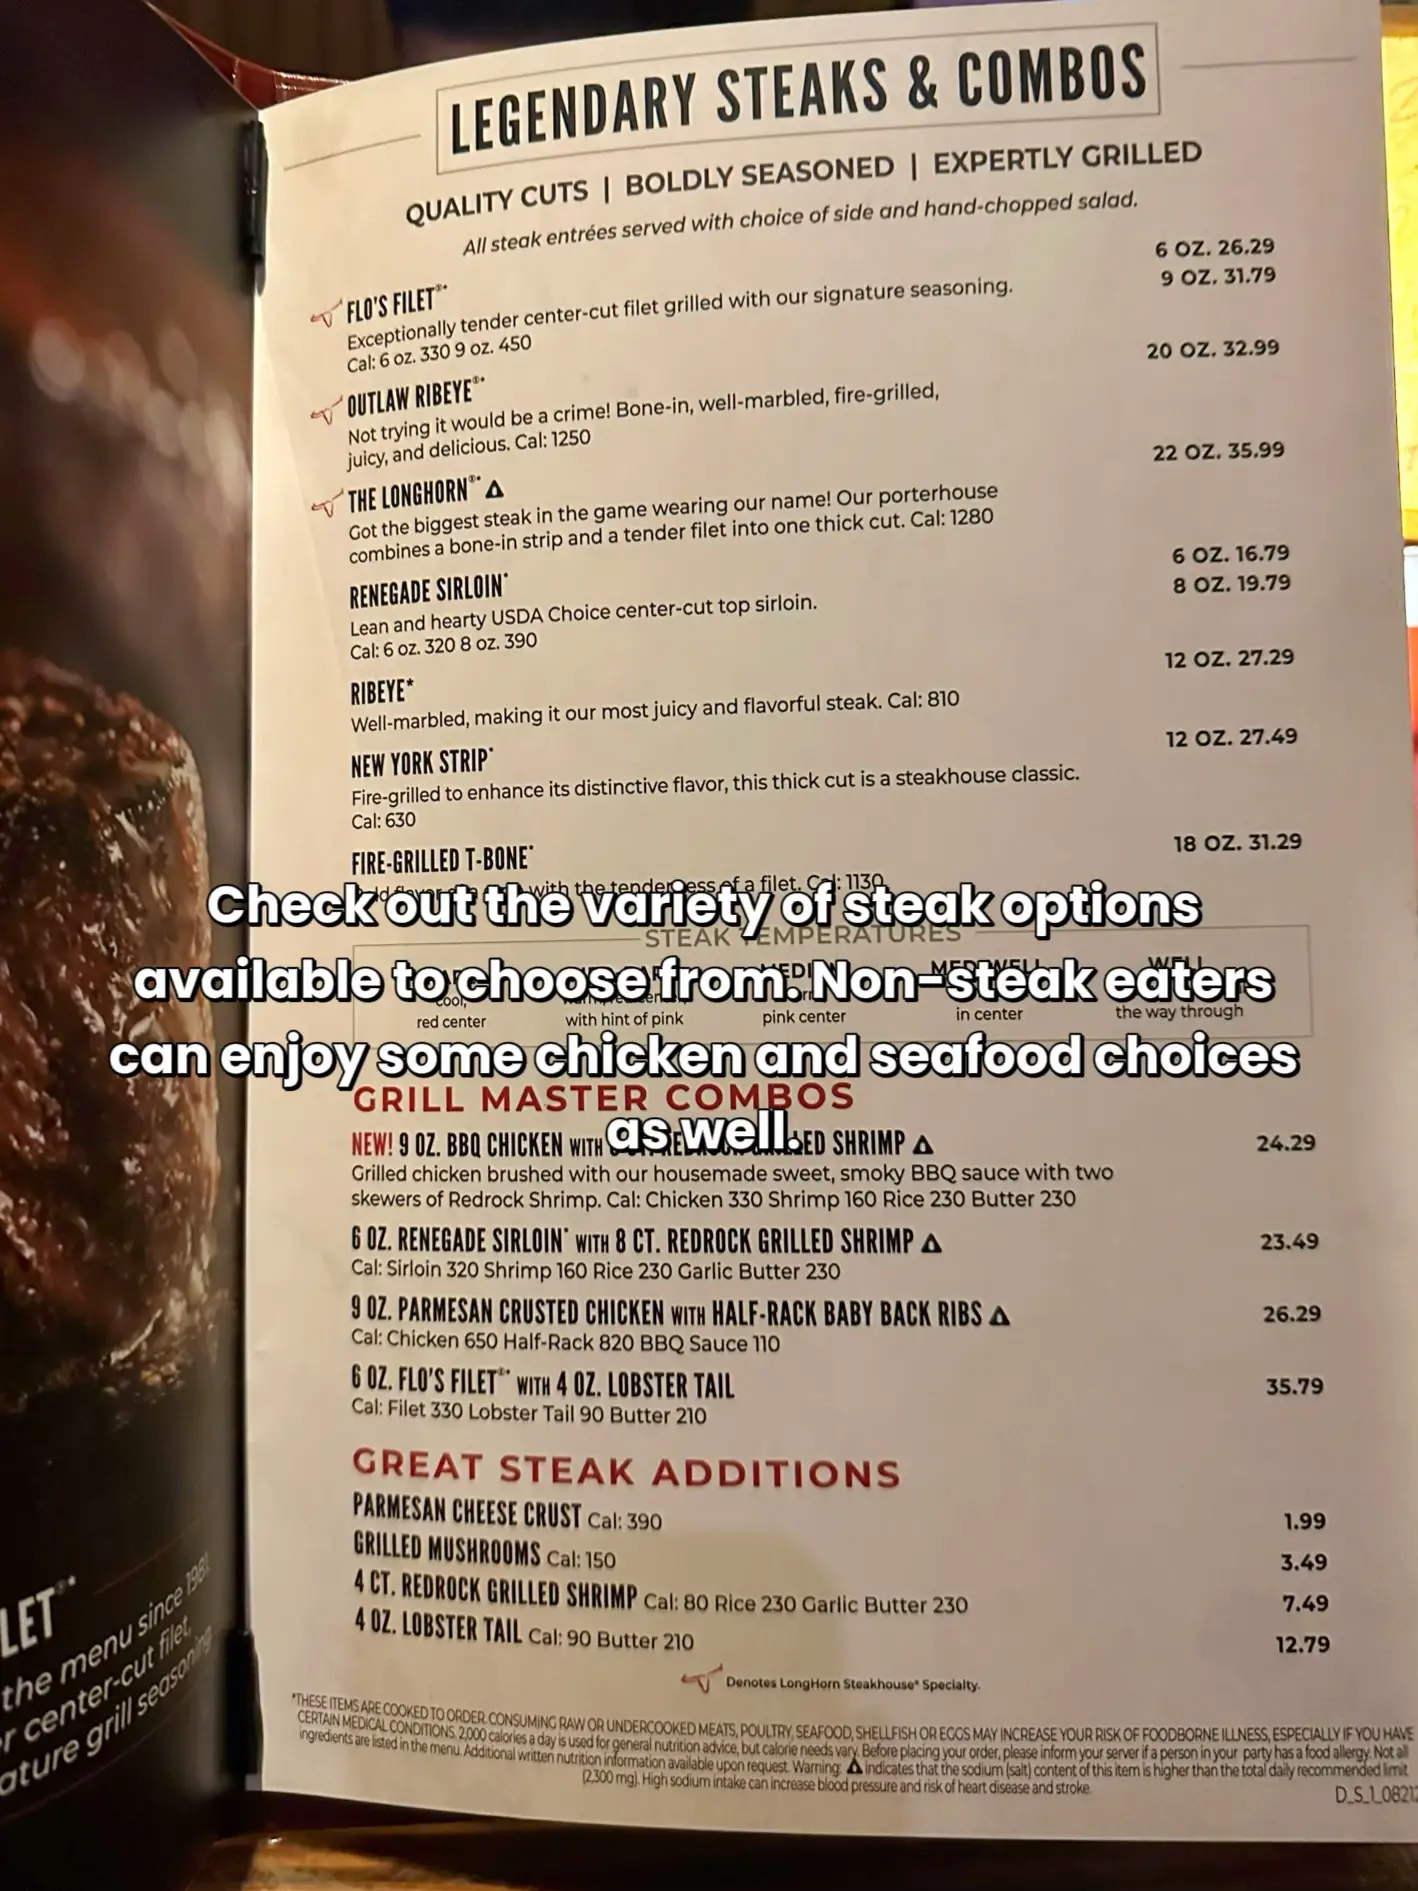 7 Reasons LongHorn Steakhouse Is So Affordable